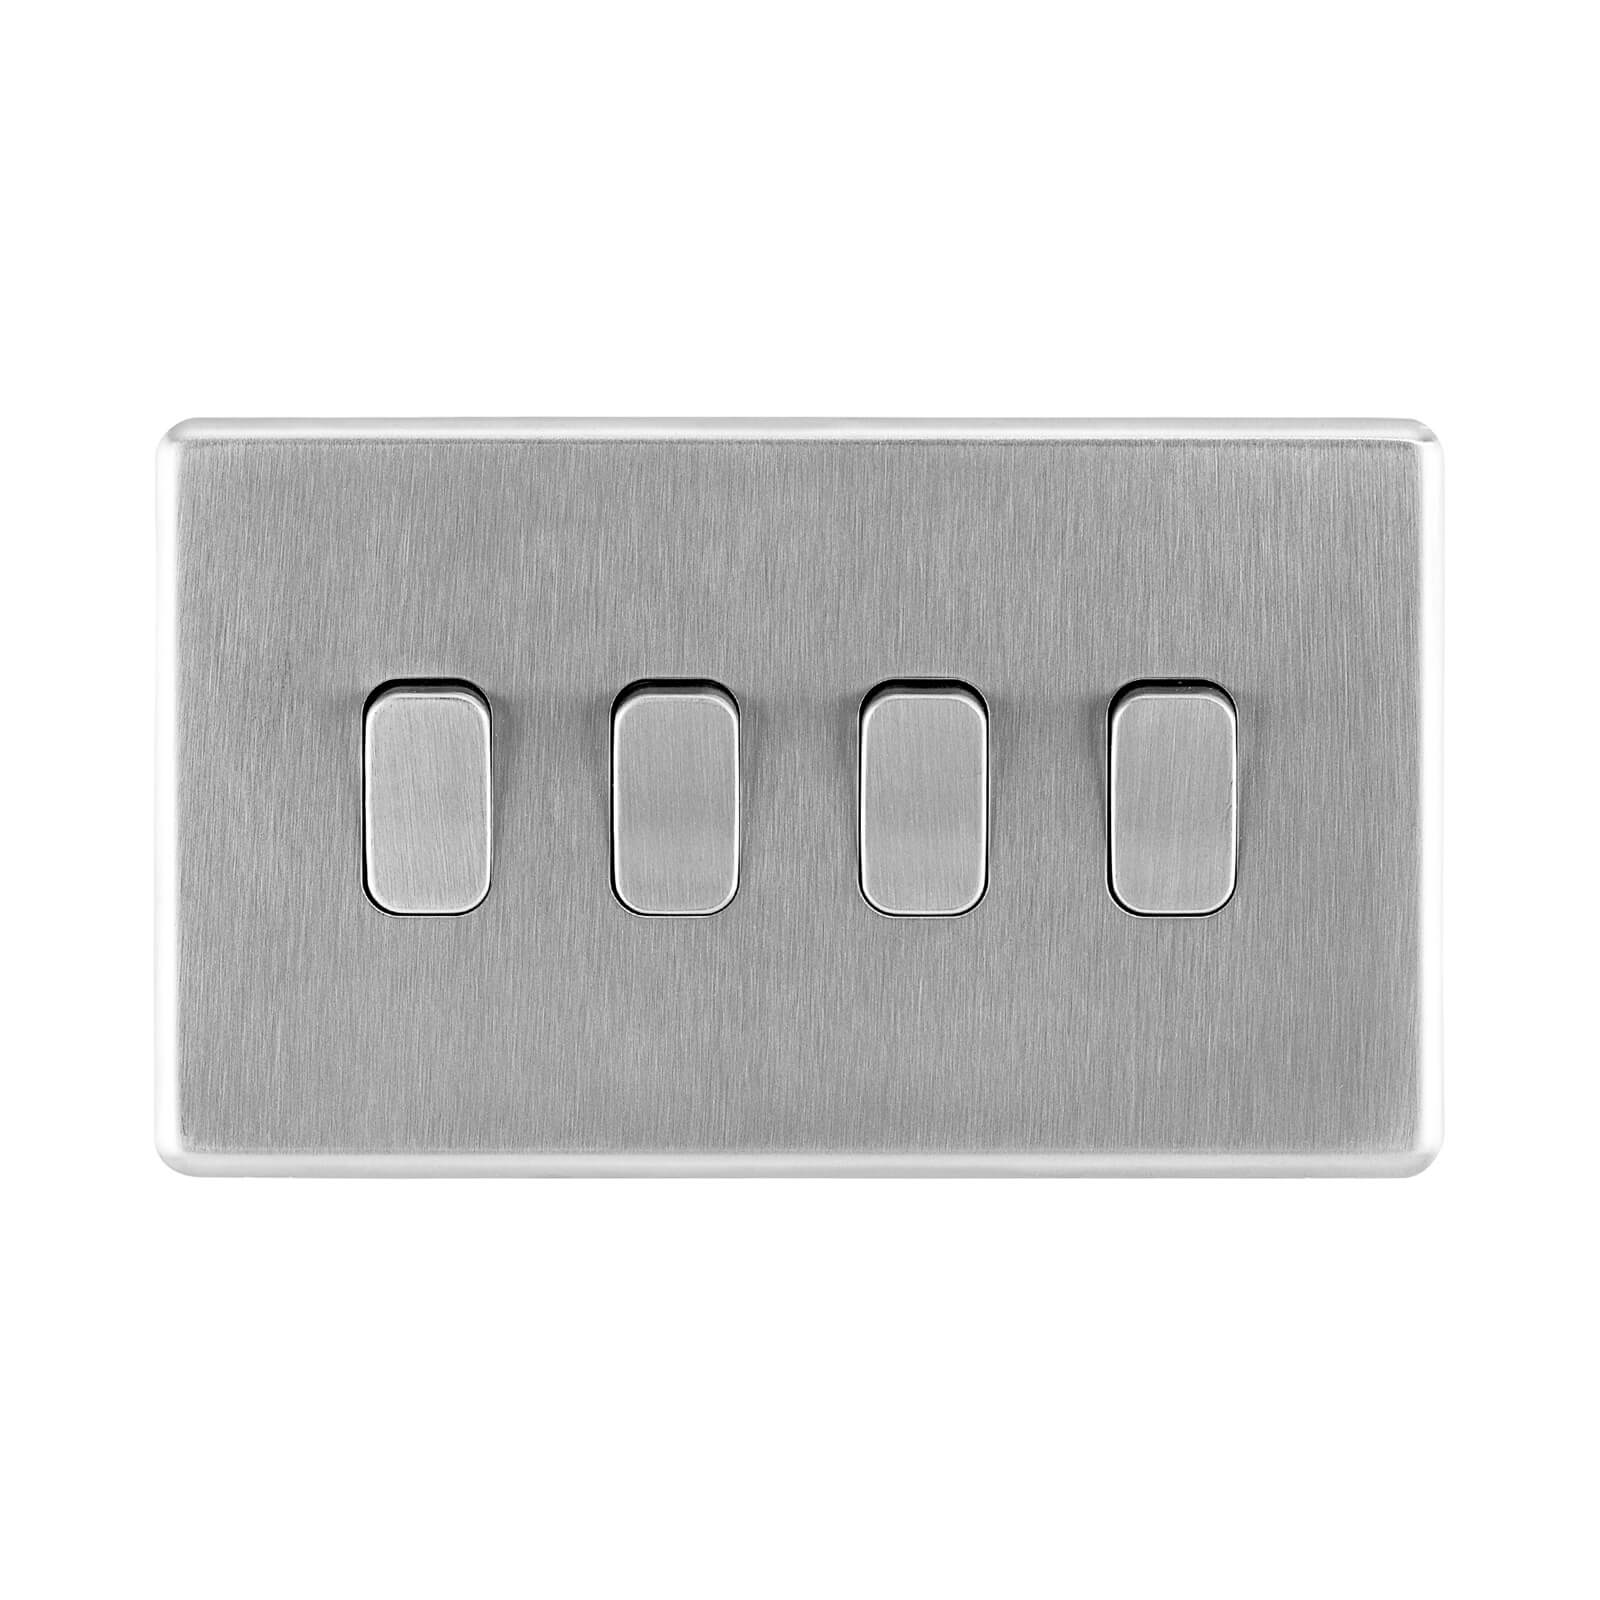 Arlec Fusion 10A 4Gang 2Way Stainless Steel Quadruple light switch